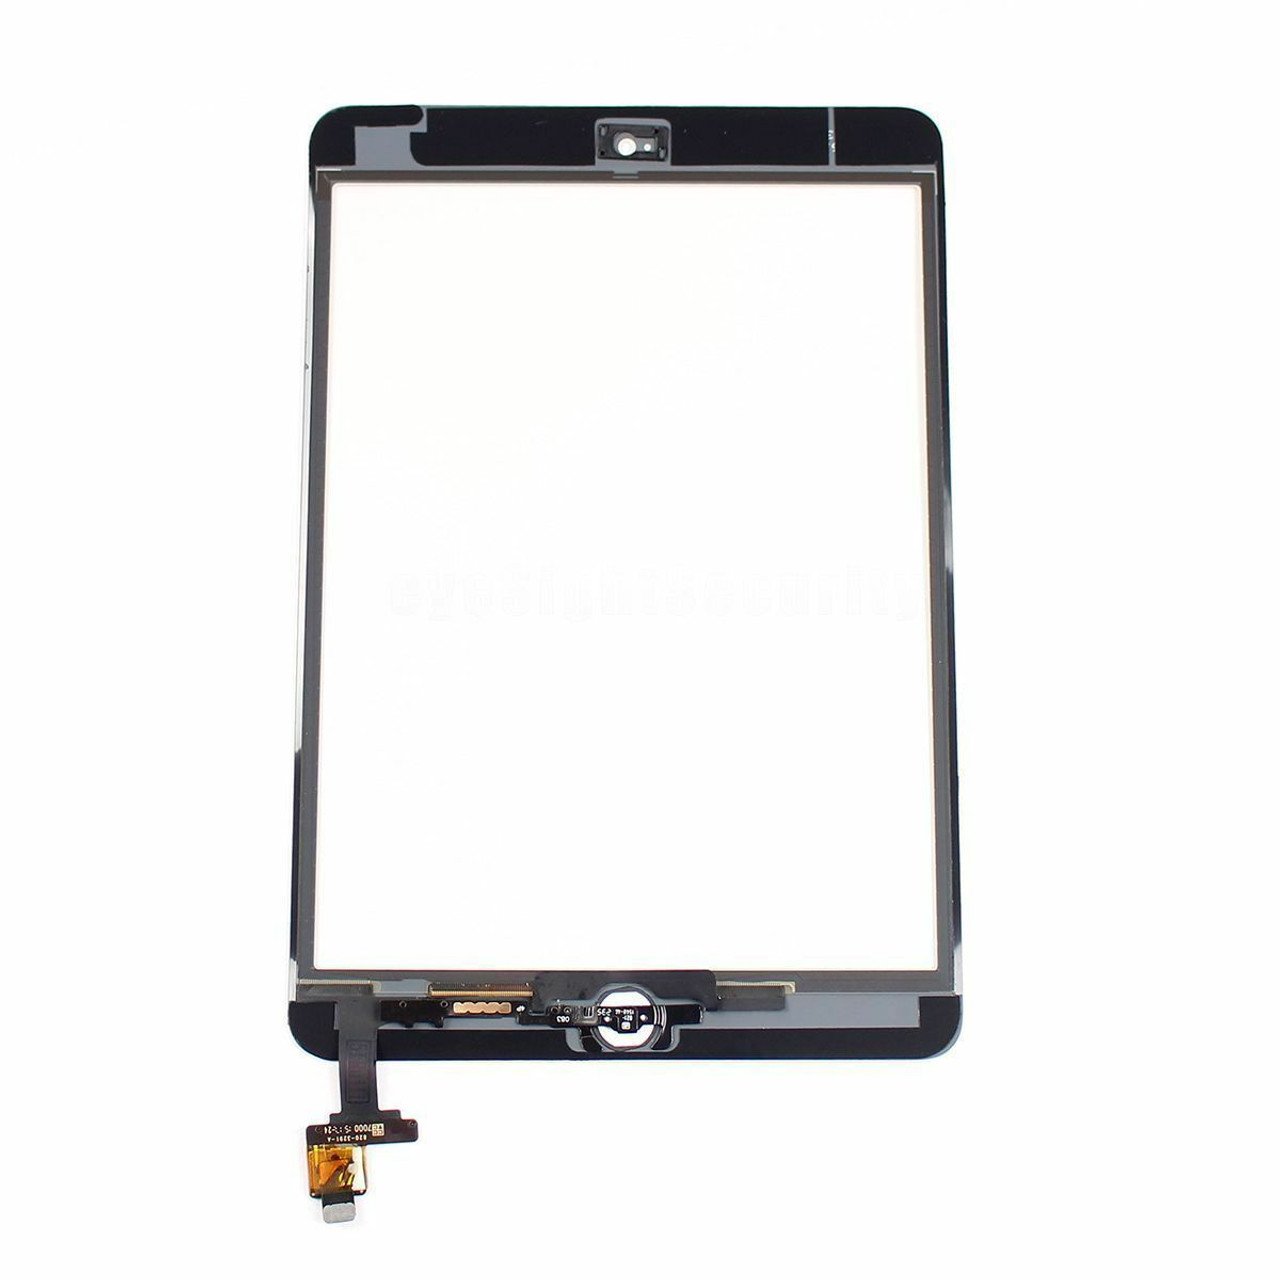 OEM White Touch Glass Digitizer Screen Home Button W/ IC Connector iPad Mini 1 2